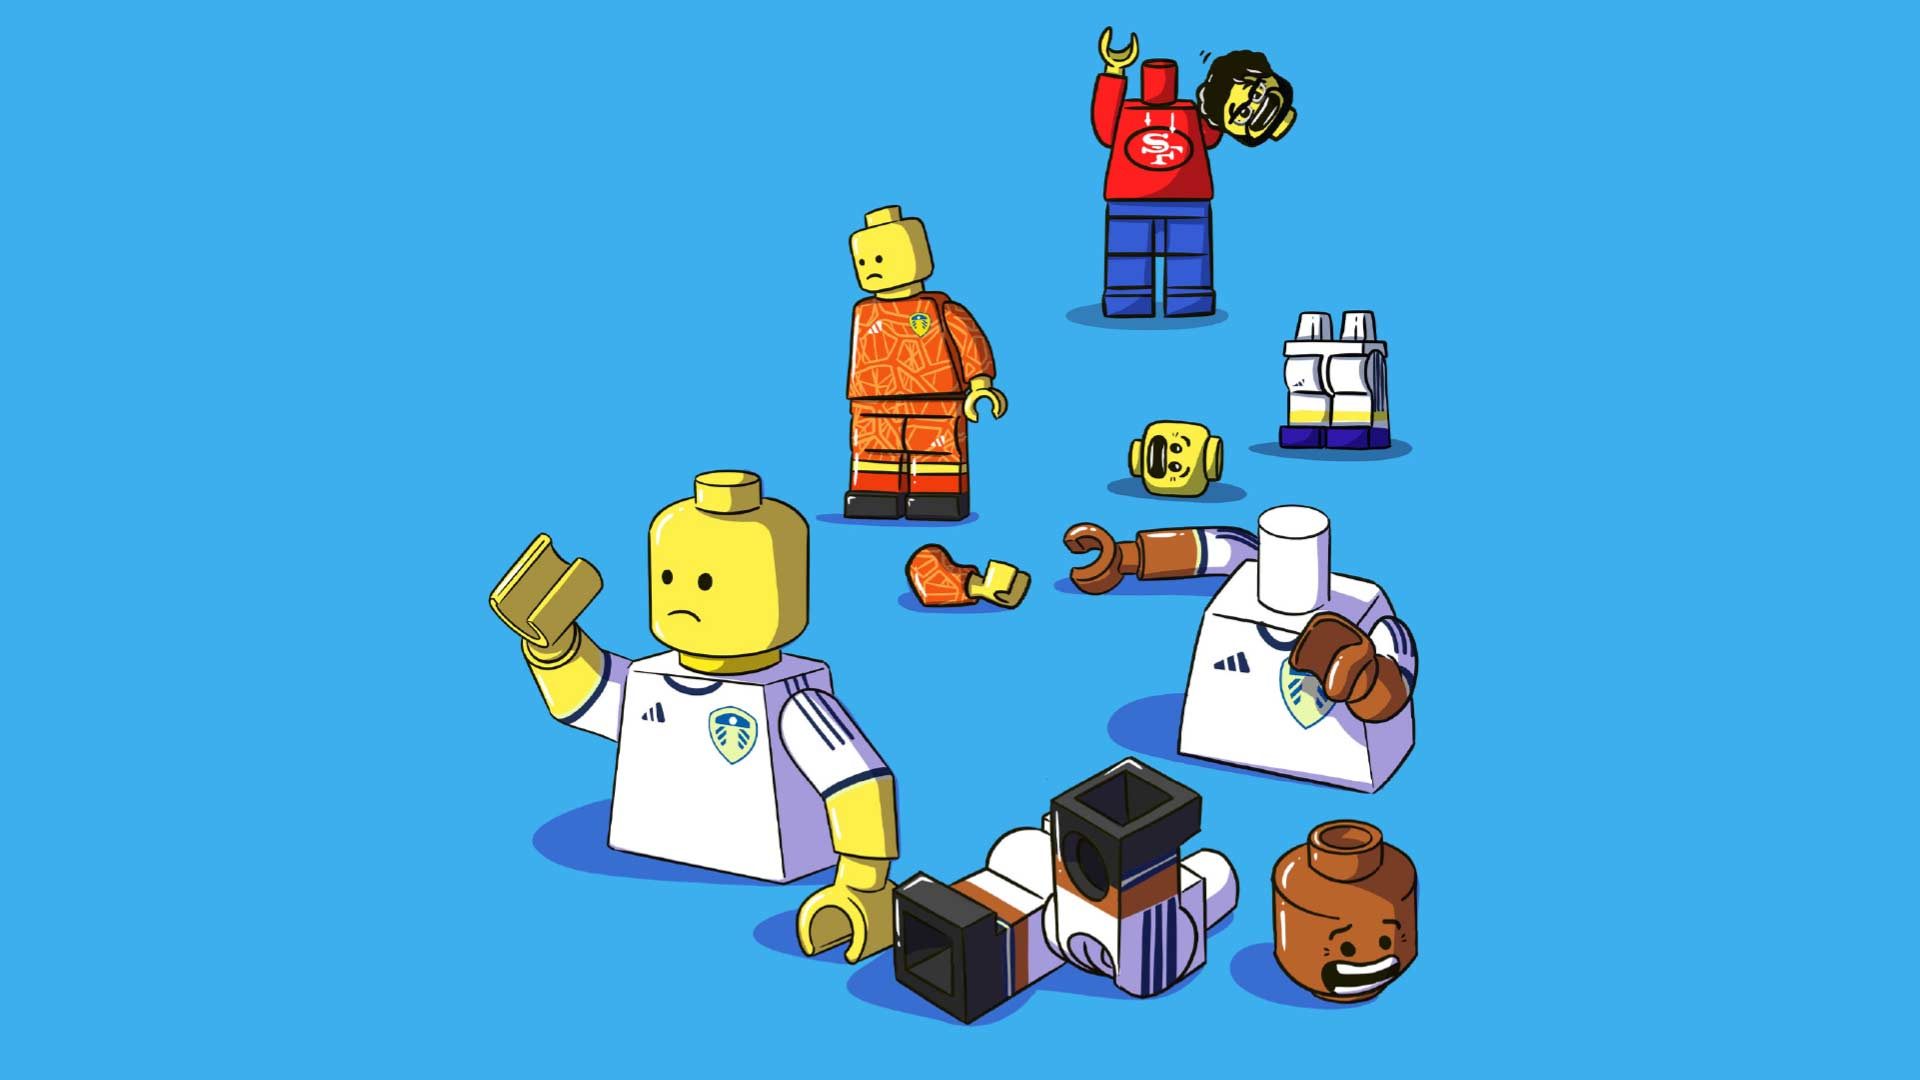 Pieces of Lego in Leeds United kits, but each one is broken, with legs, or ams, or a head missing